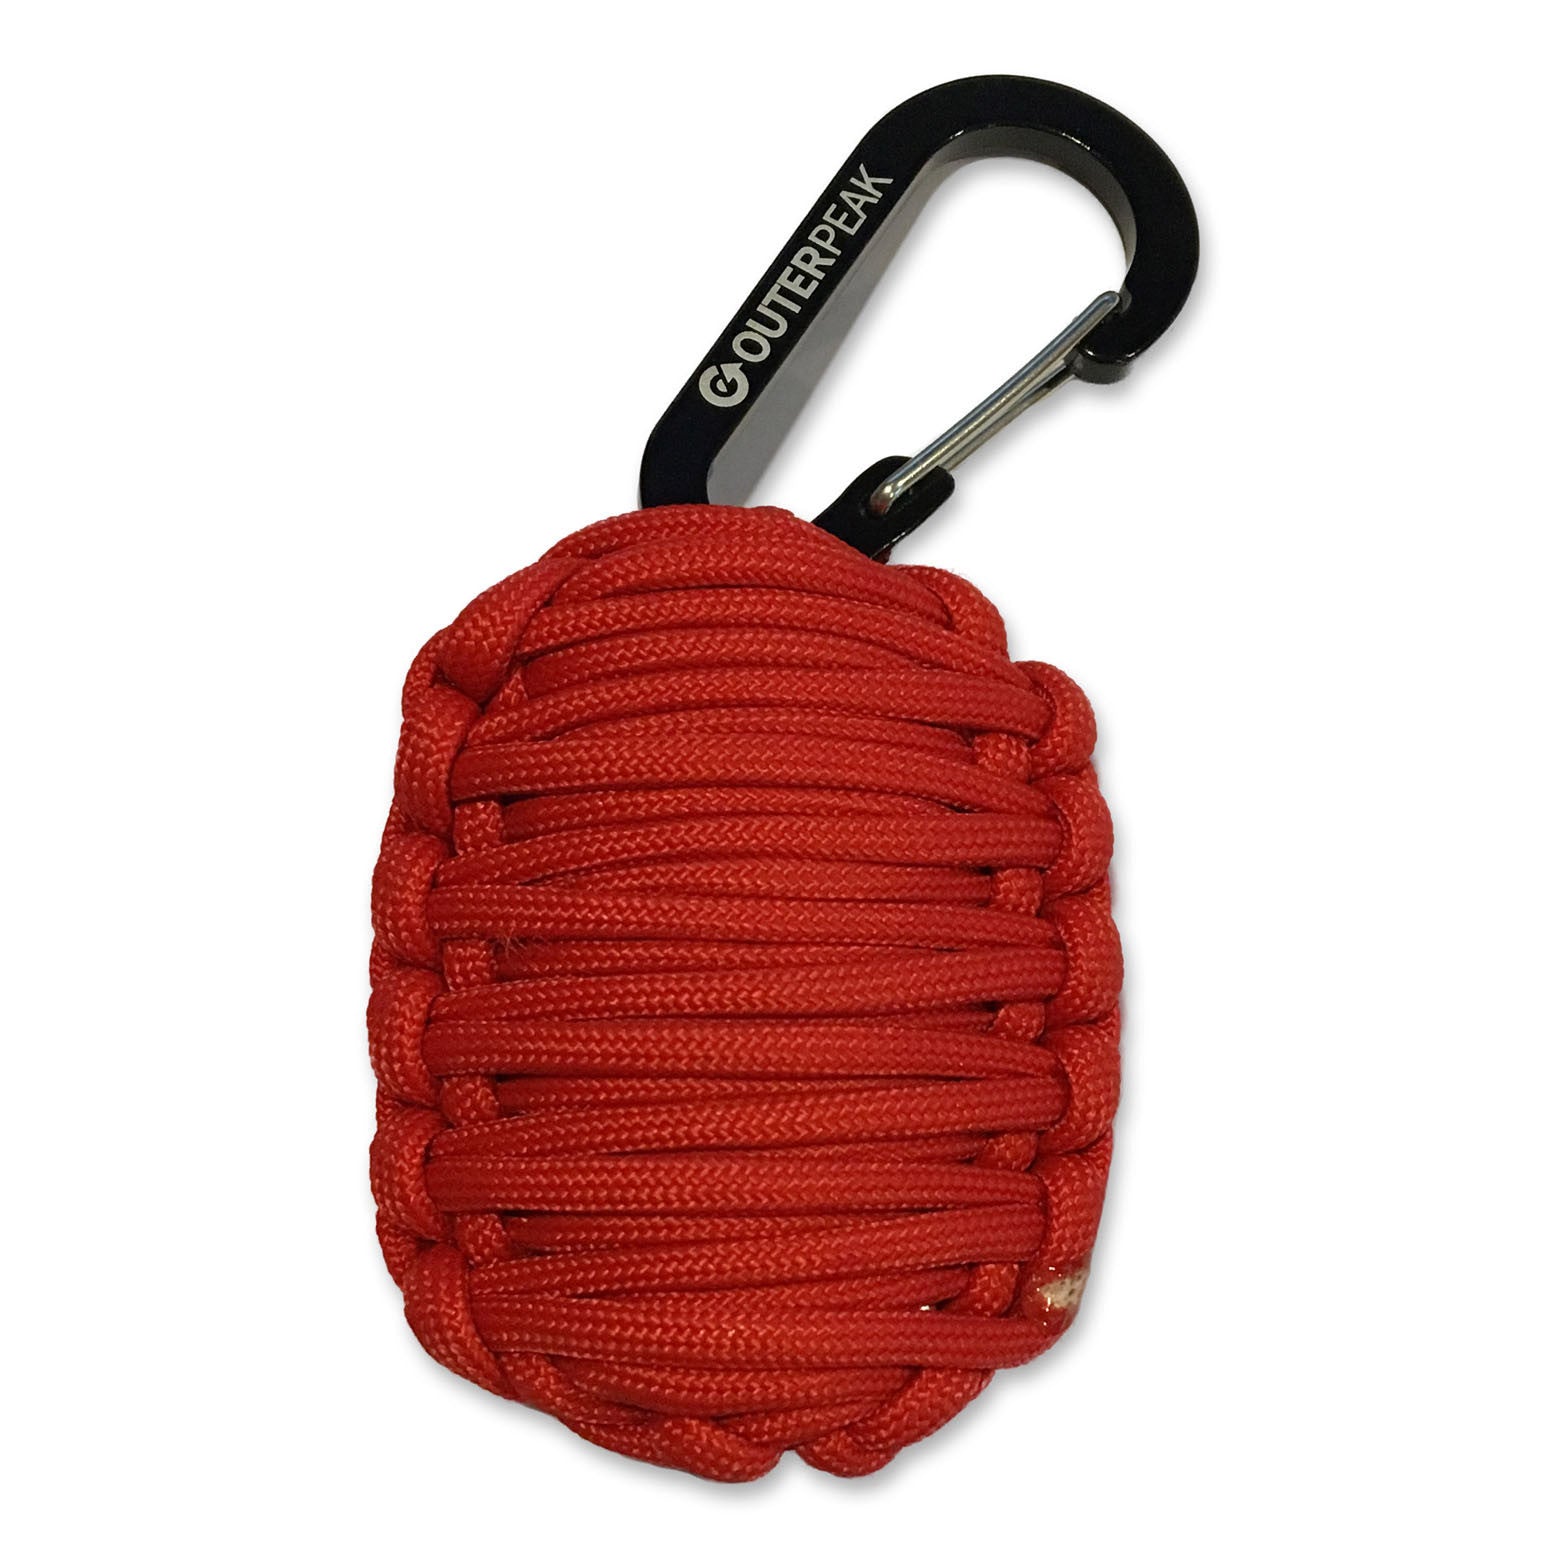 20-Piece Emergency Paracord Survival Kit (Red) – OuterPeak